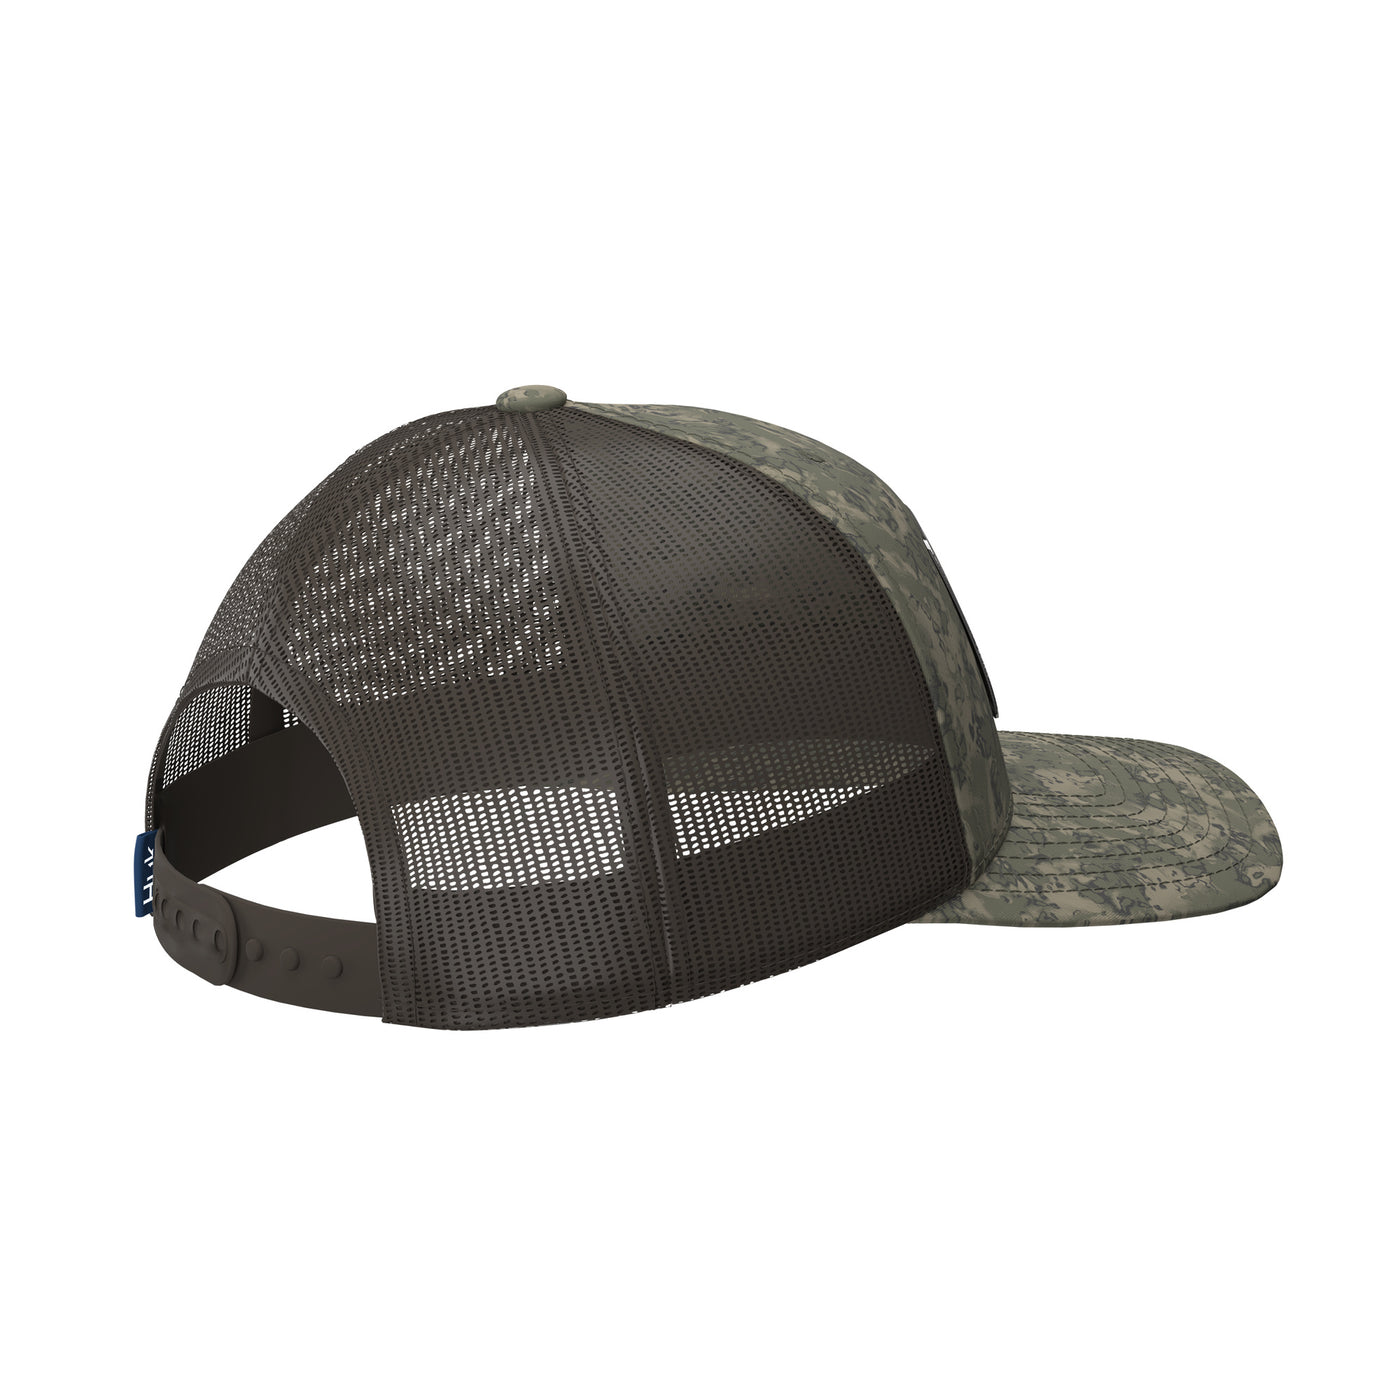  HUK Unisex Trucker, Anti-Glare Snapback Fishing Hat for Kids,  Fin Flats Camo-Crystal Blue, One Size : Clothing, Shoes & Jewelry